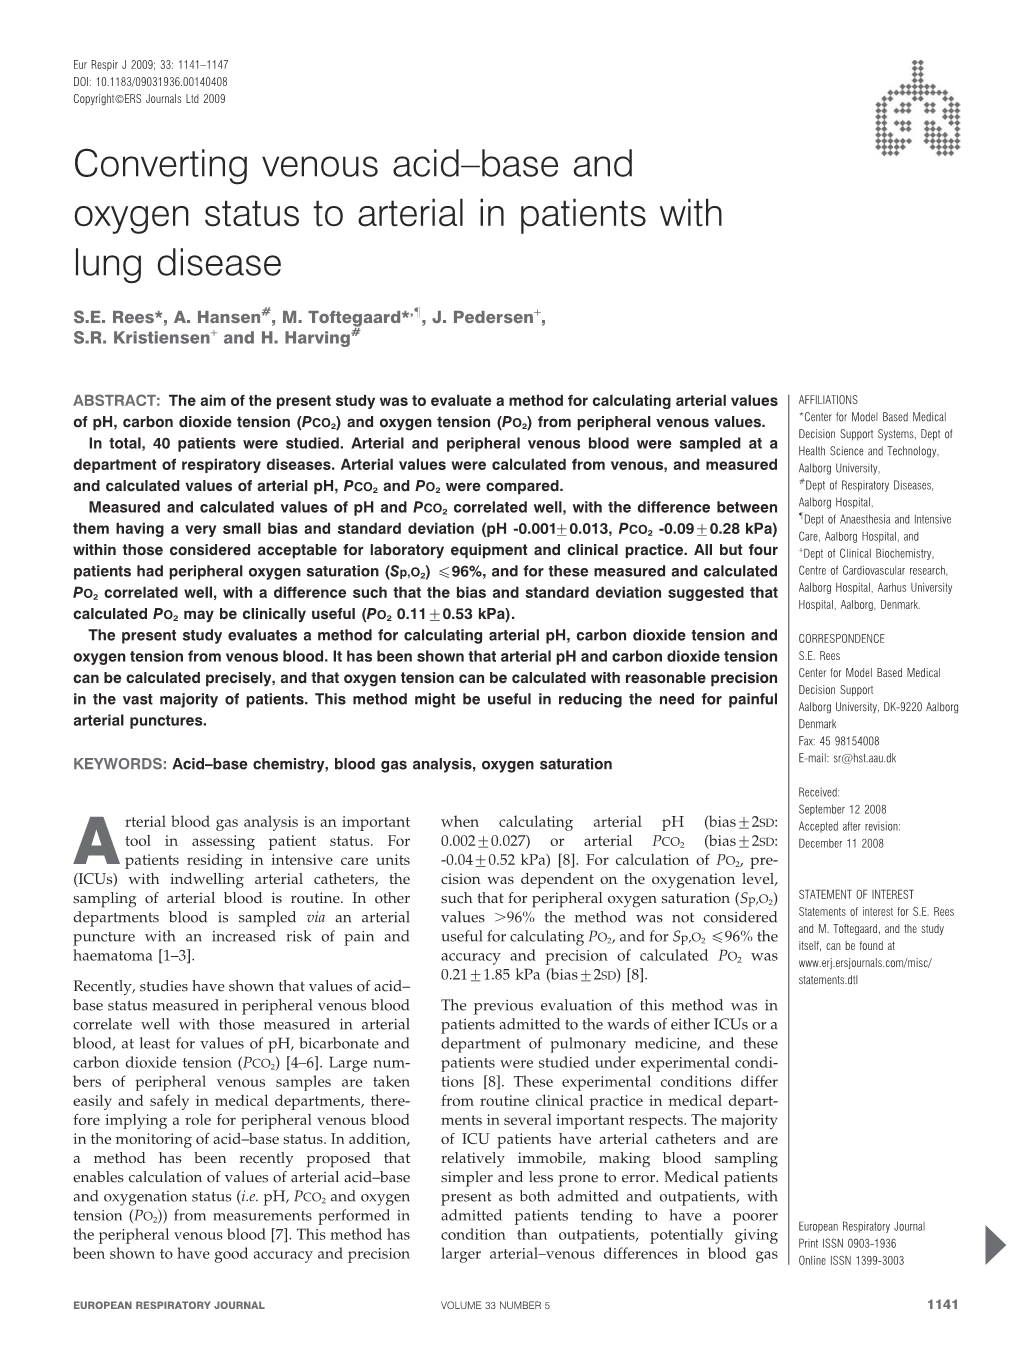 Converting Venous Acid–Base and Oxygen Status to Arterial in Patients with Lung Disease